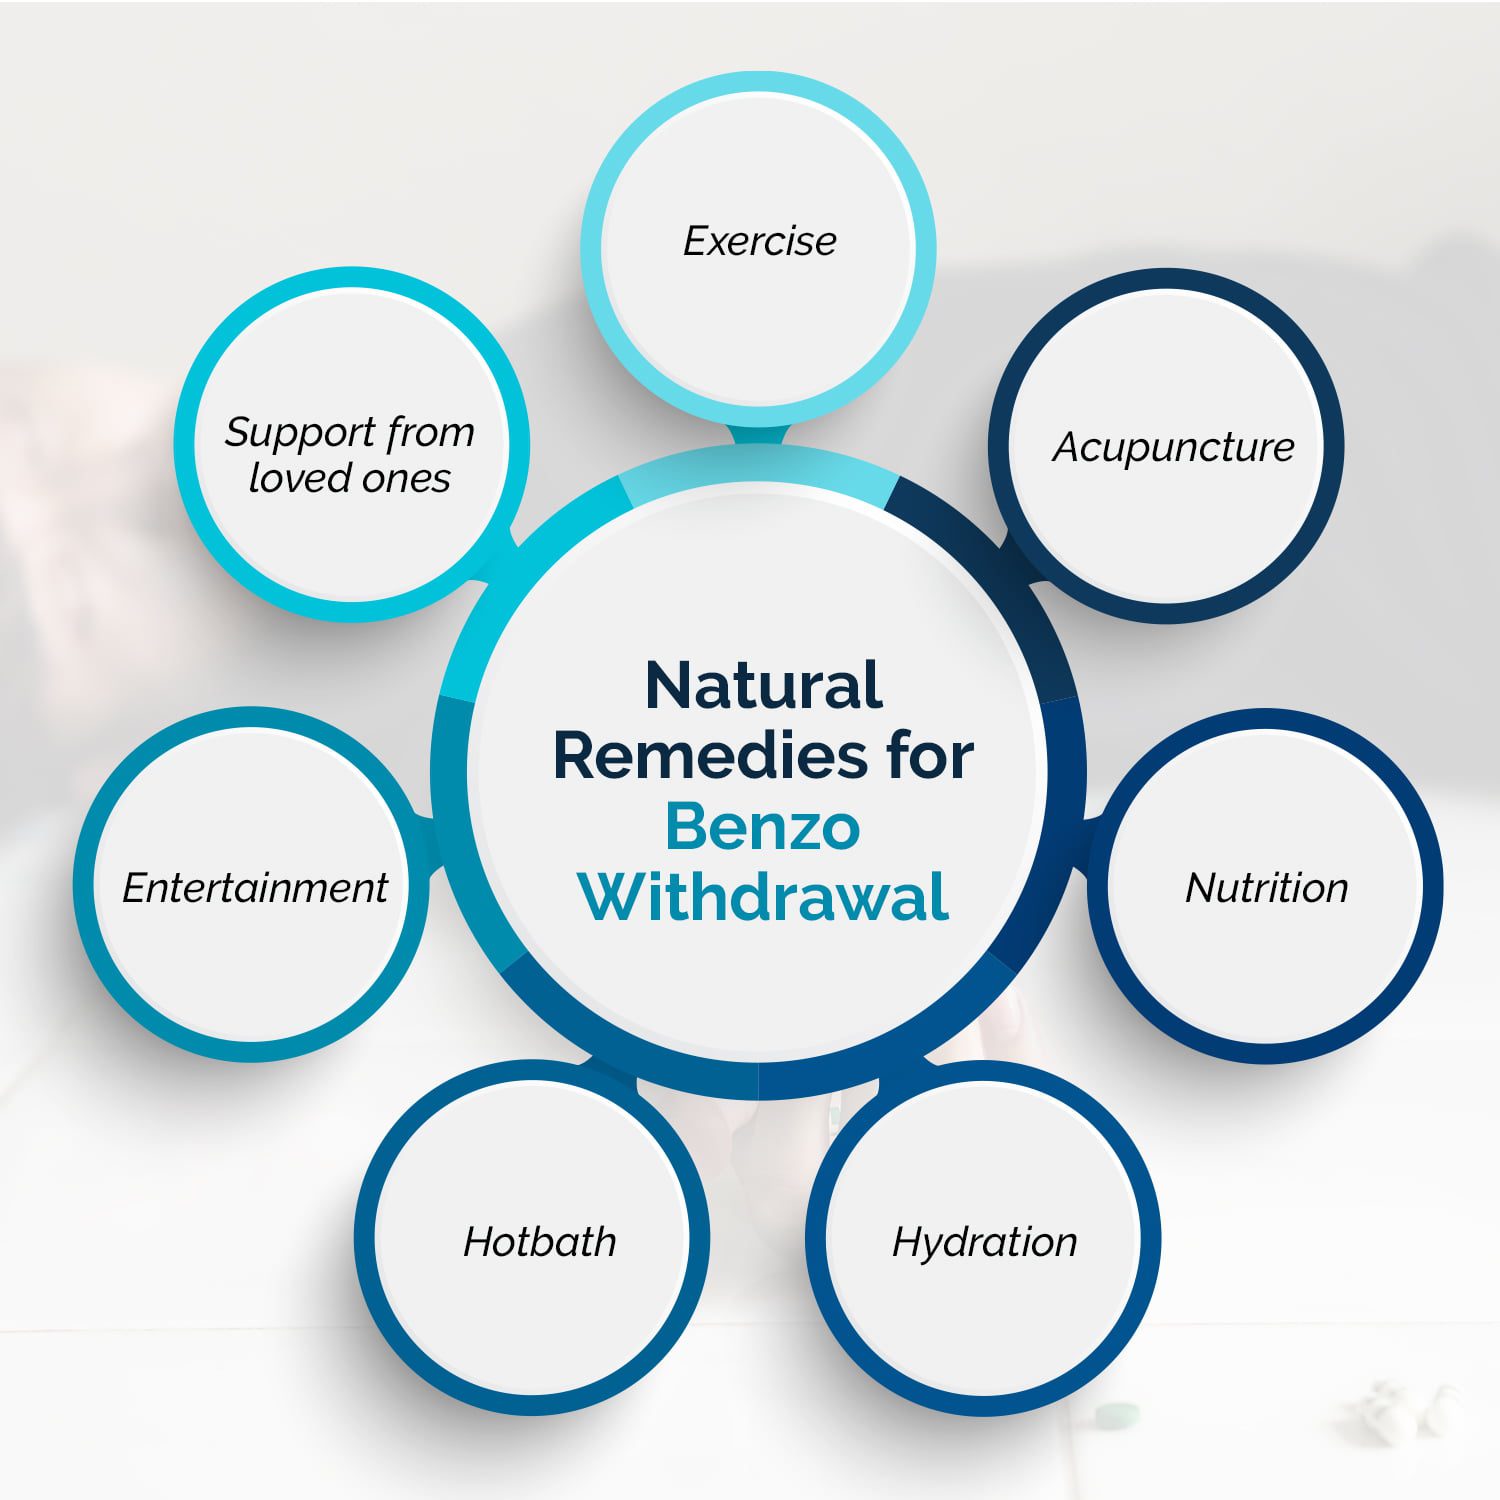 Natural remedies for benzo withdrawal